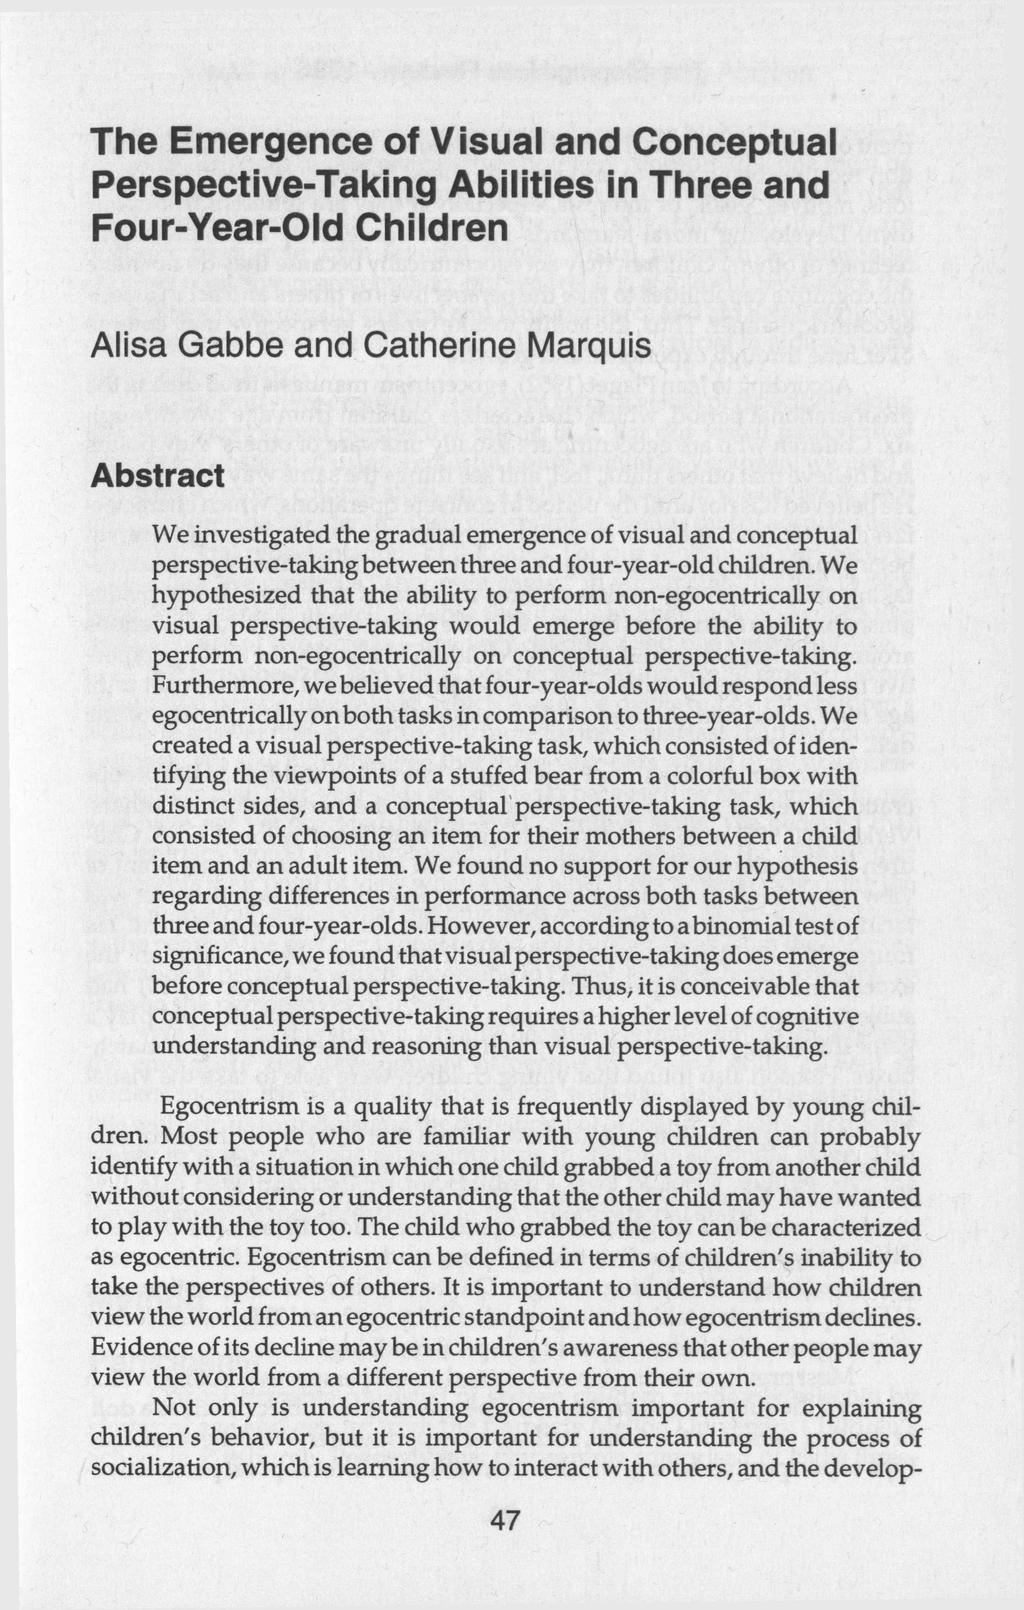 The Emergence of Visual and Conceptual Perspective-Taking Abilities in Three and Four-Year-Old Children Alisa Gabbe and Catherine Marquis Abstract We investigated the gradual emergence of visual and